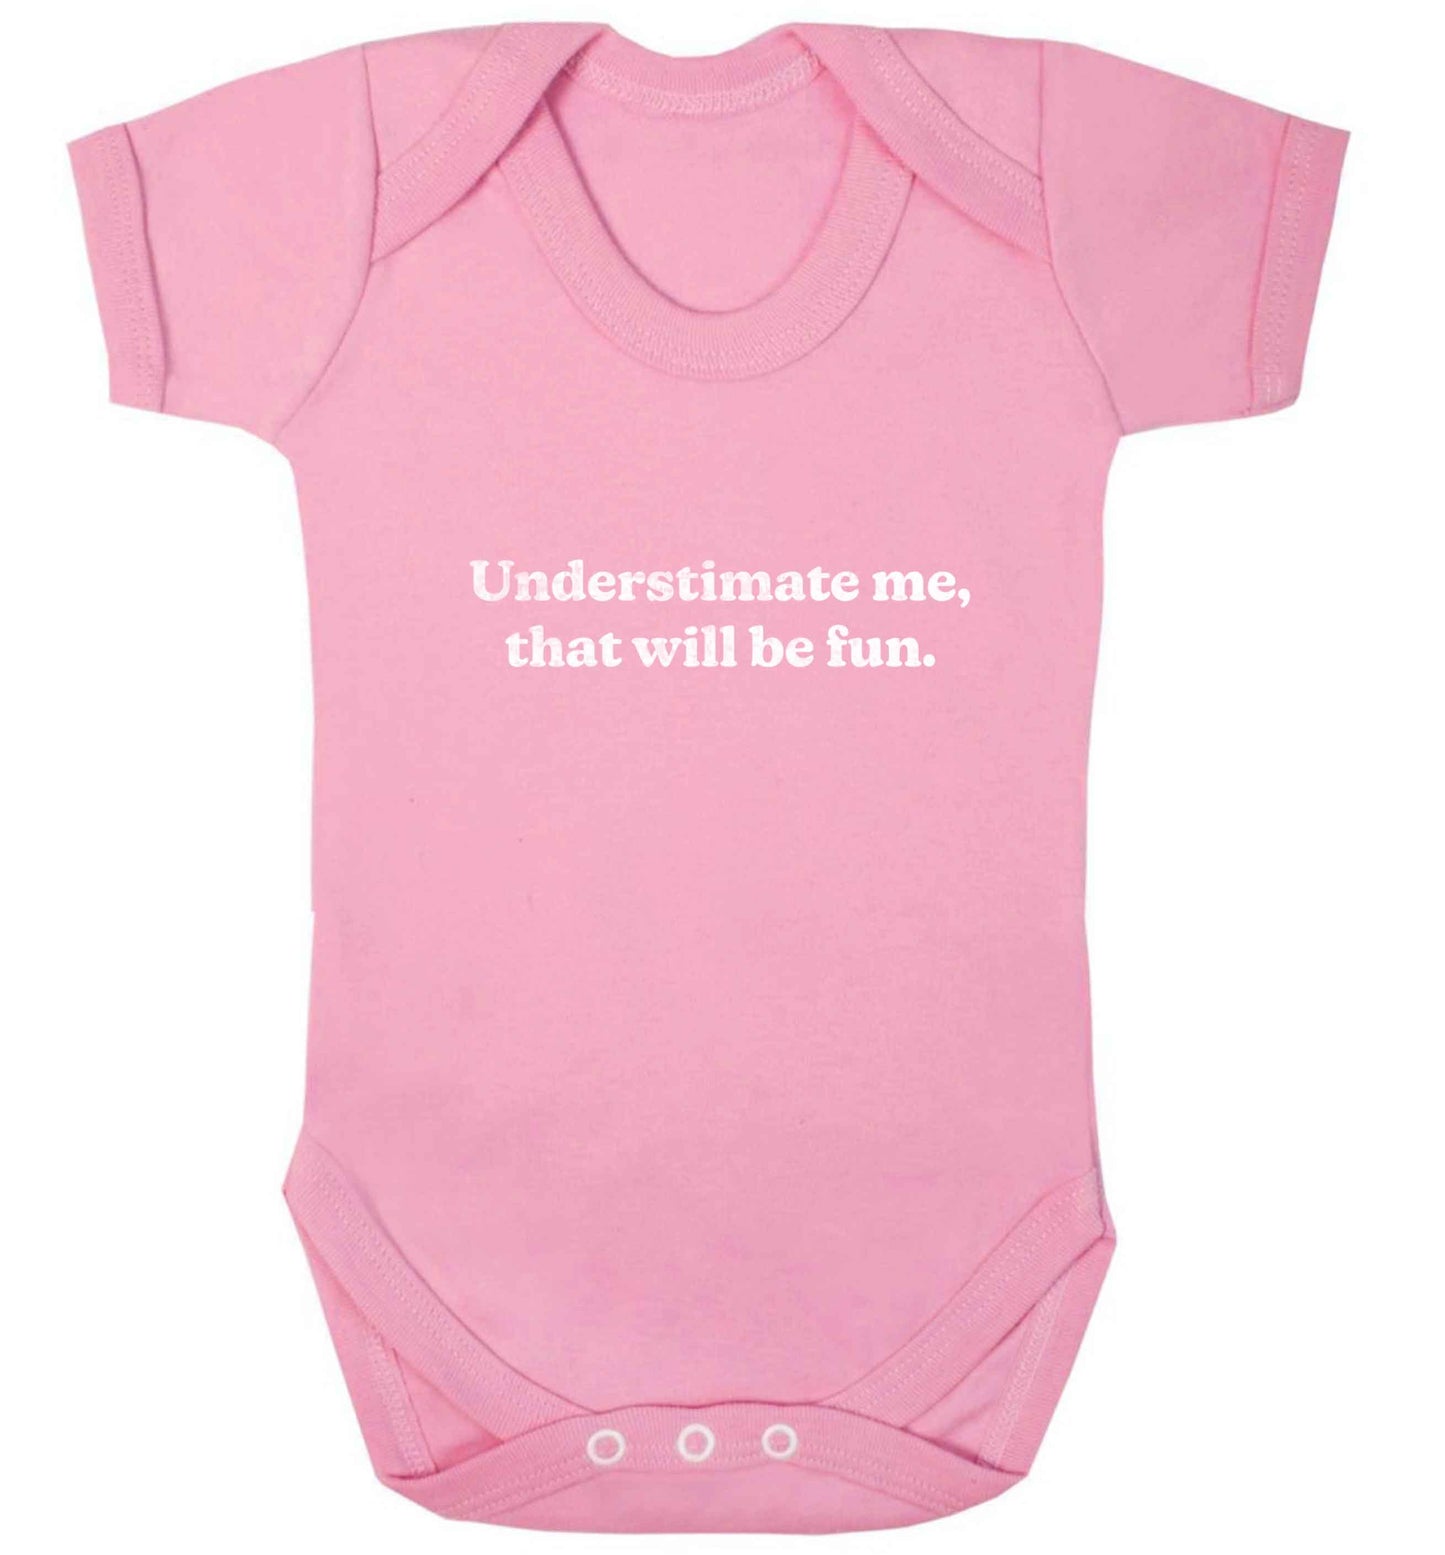 Underestimate me that will be fun baby vest pale pink 18-24 months